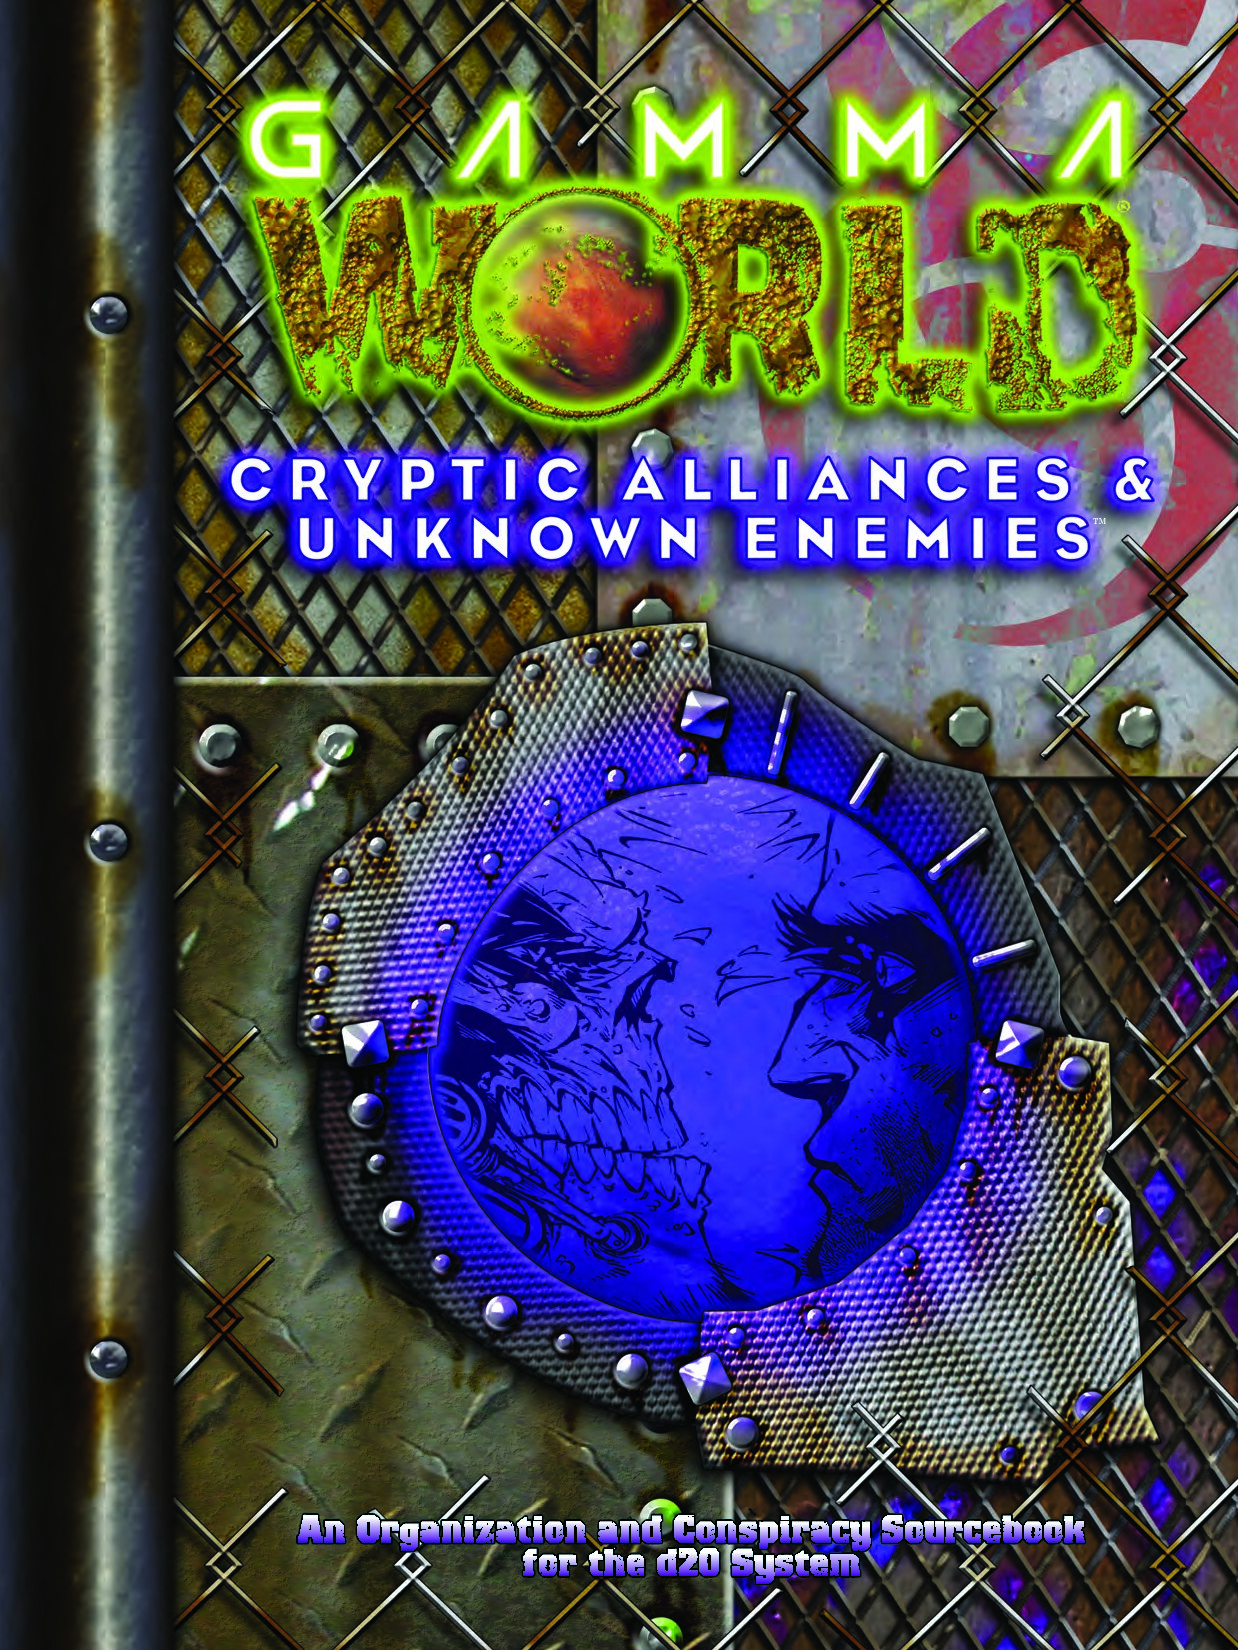 WW17254 Gamma World - Cryptic Alliances and Unknown Enemies